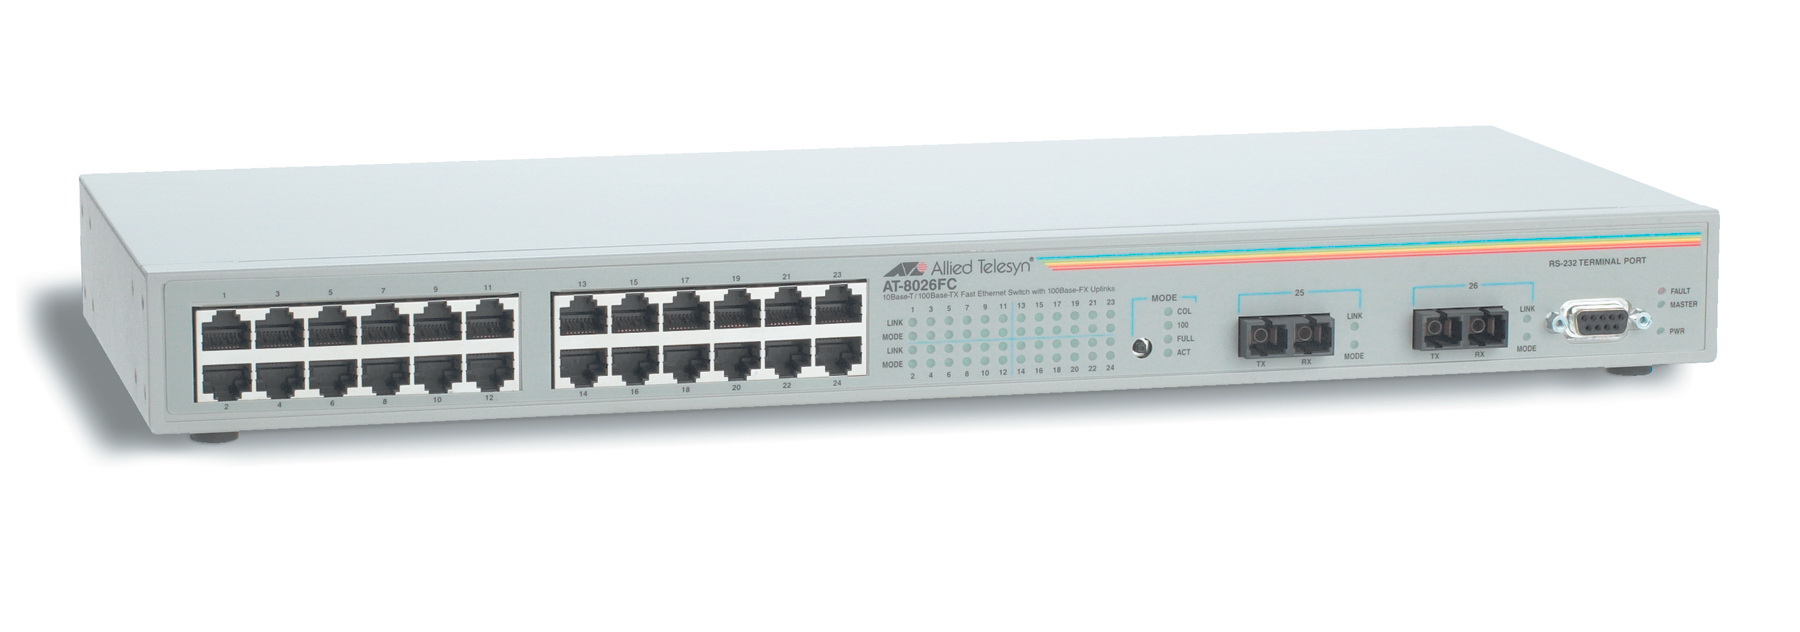 AT-8026FC Allied Telesis Network Switch